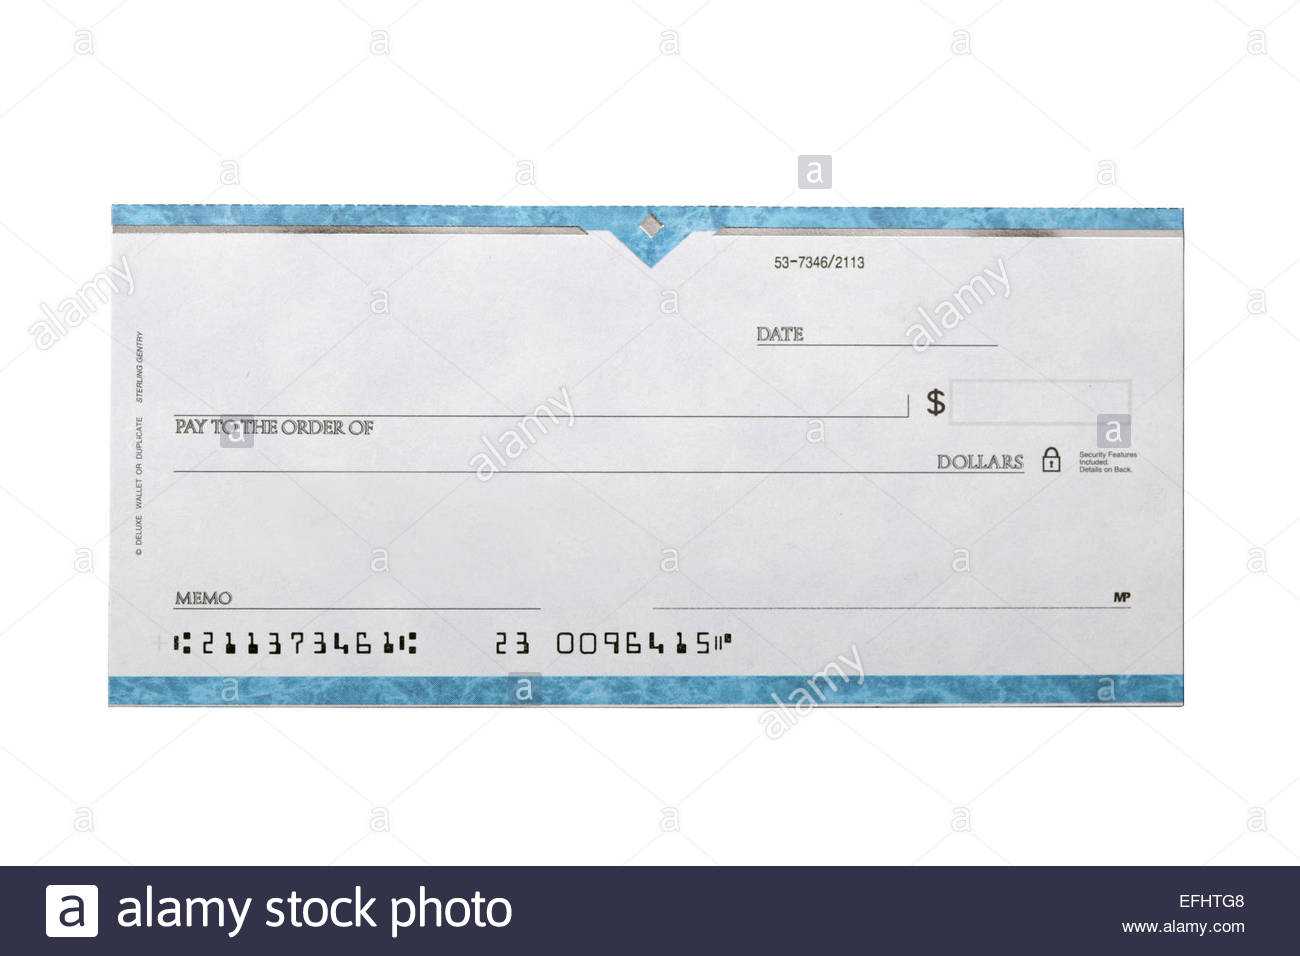 Blank Cheque Stock Photos & Blank Cheque Stock Images – Alamy In Blank Cheque Template Uk